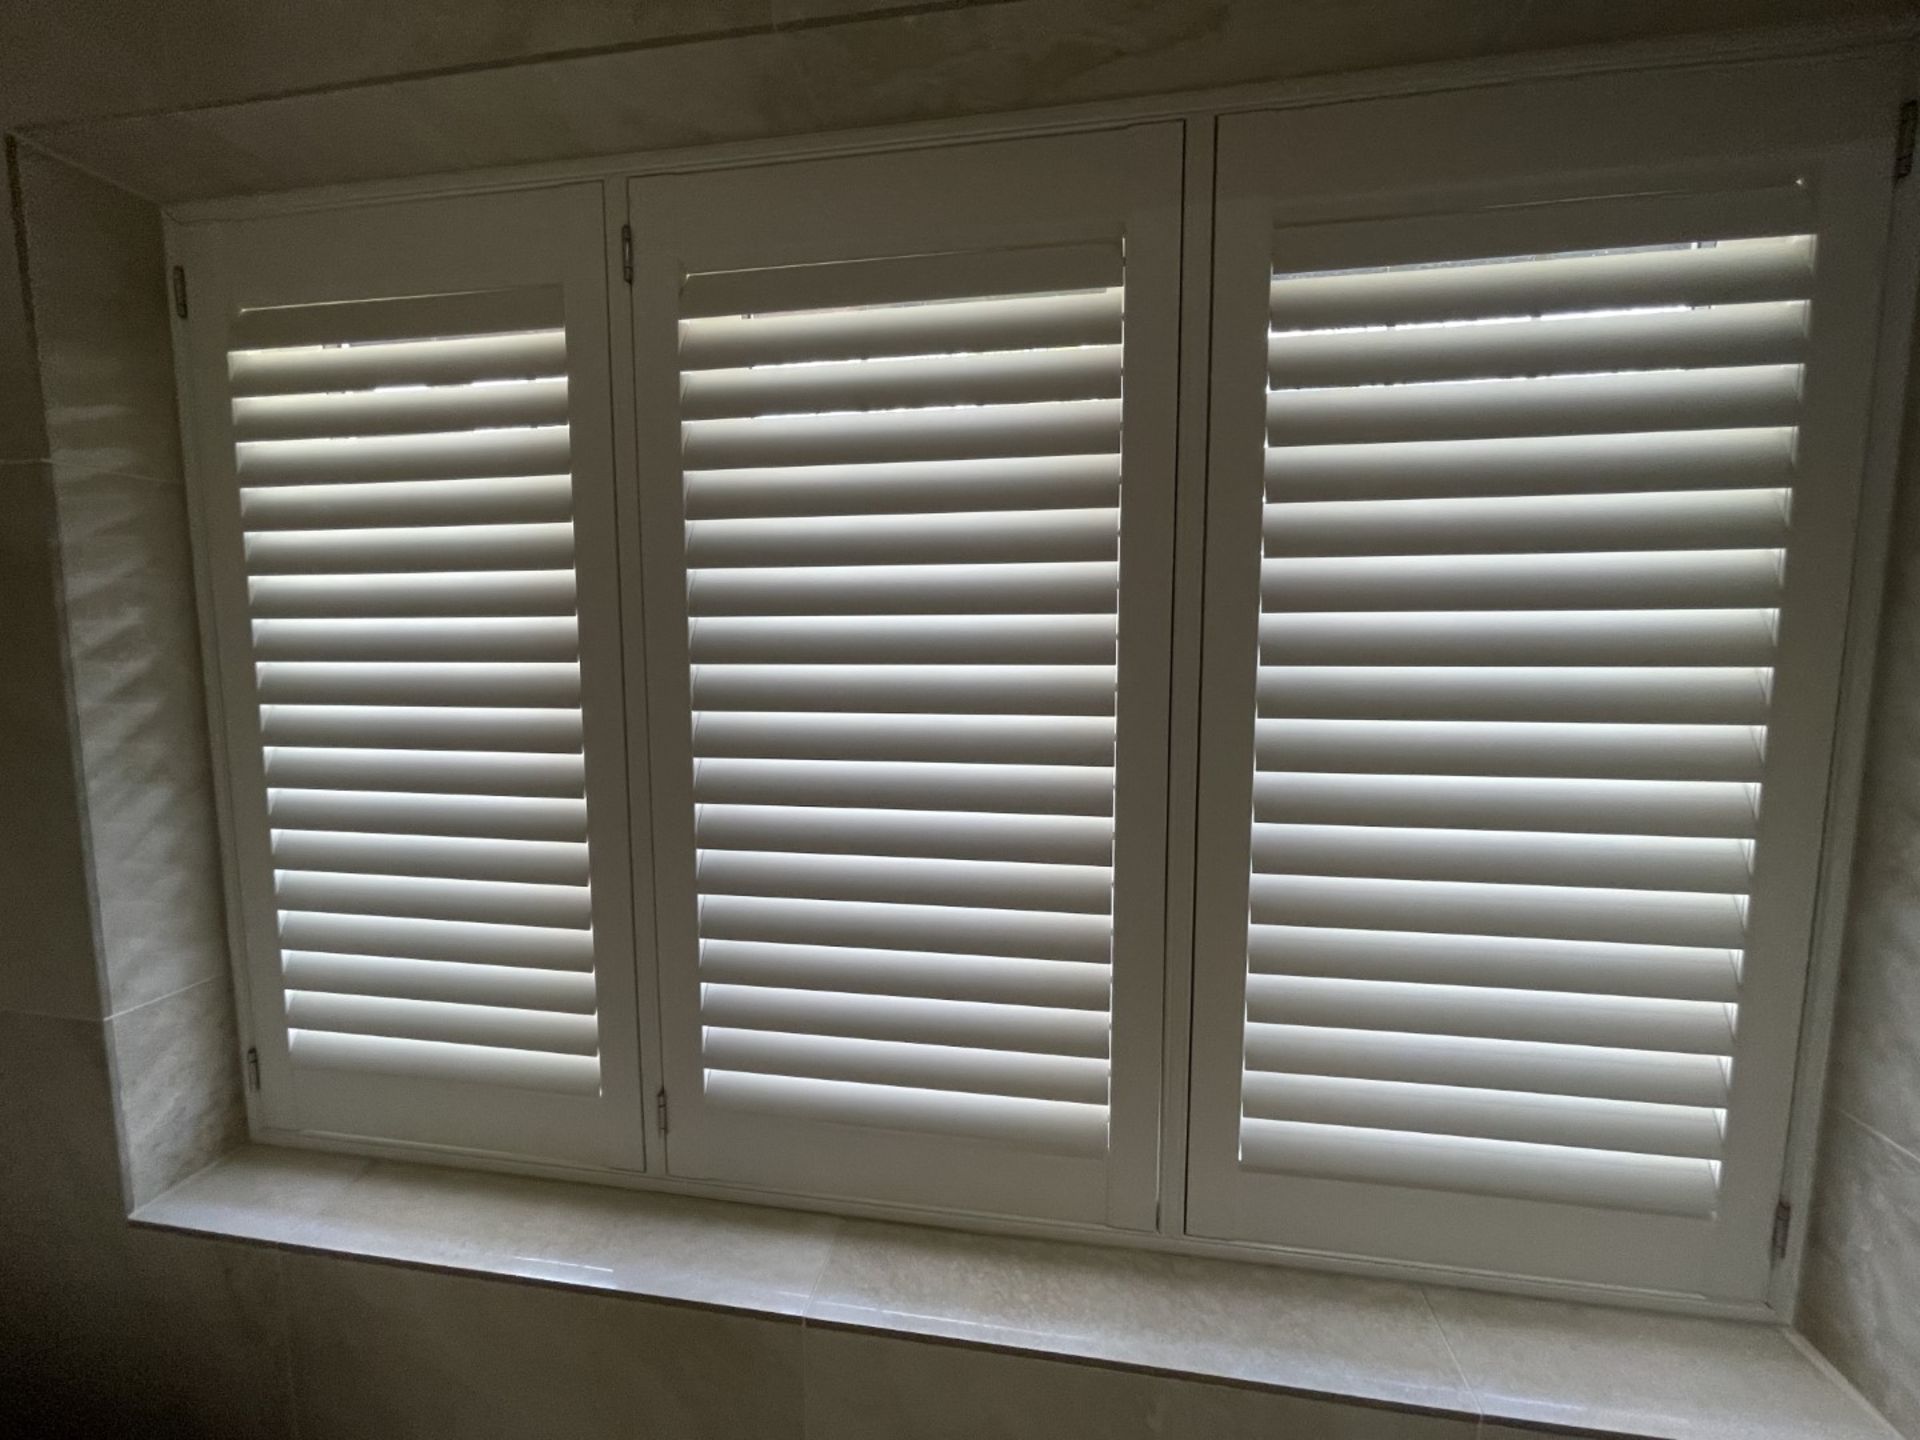 1 x Hardwood Timber Double Glazed Leaded 3-Pane Window Frame fitted with Shutter Blinds - Image 6 of 15